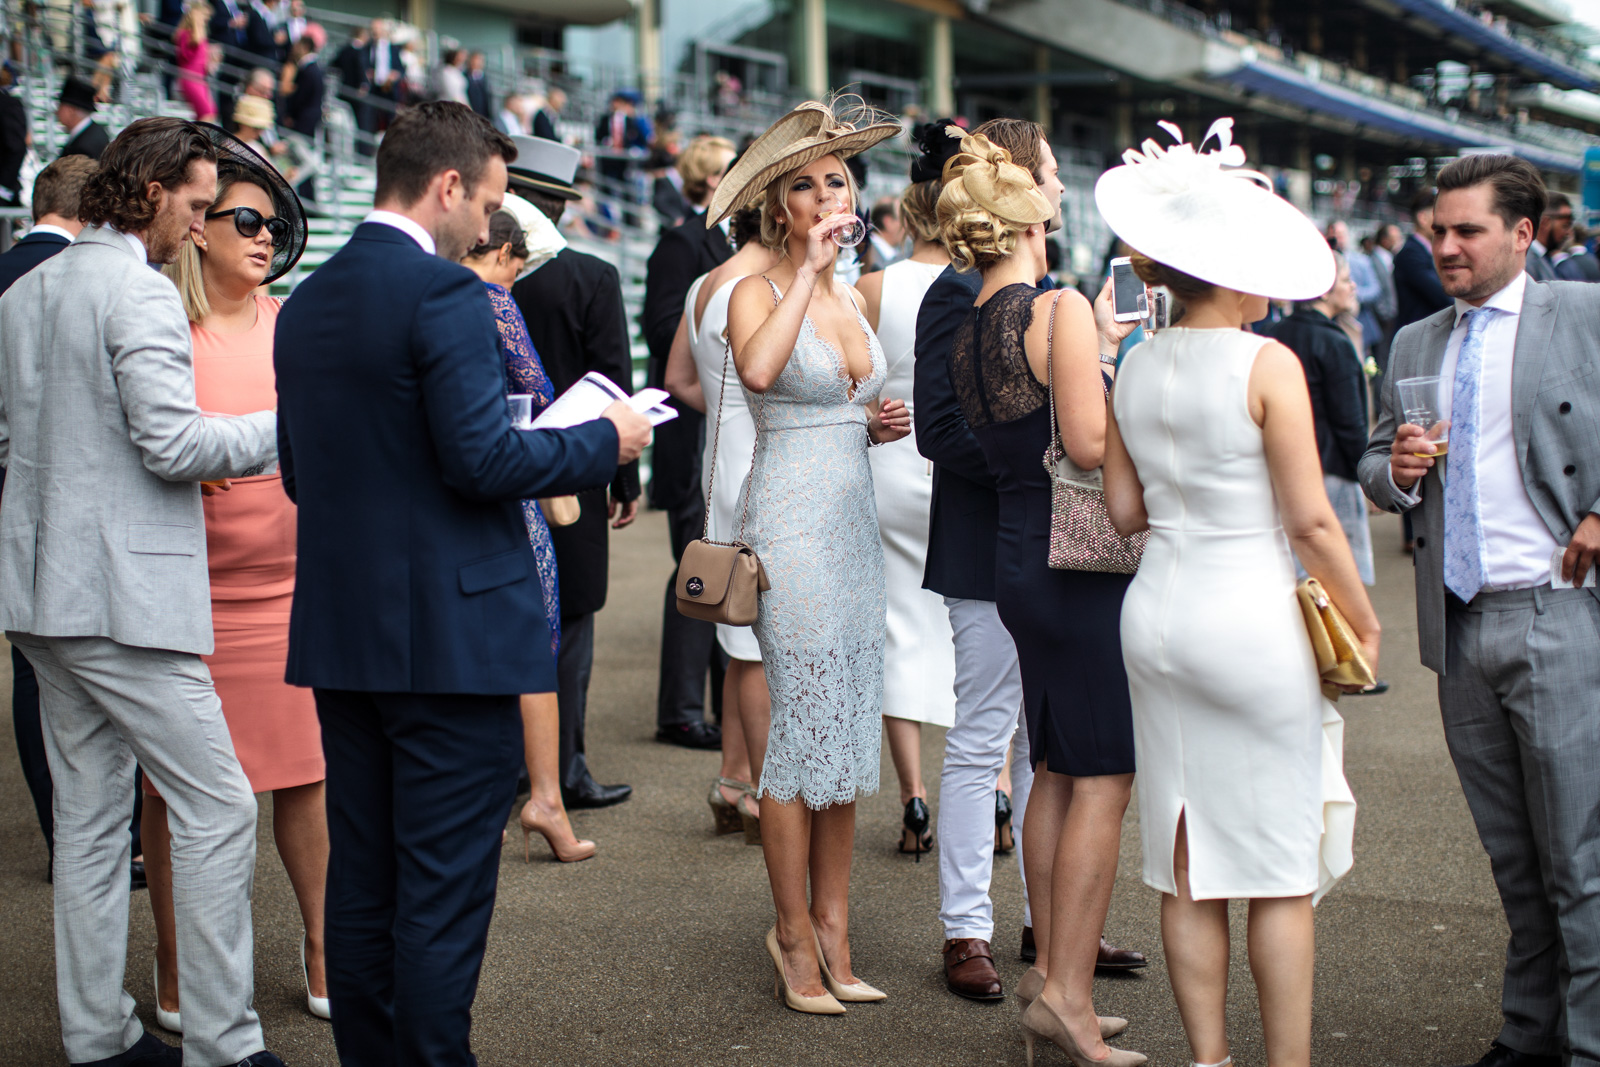  Racegoers attend Royal Ascot 2017 at Ascot Racecourse on June 22, 2017 in Ascot. 